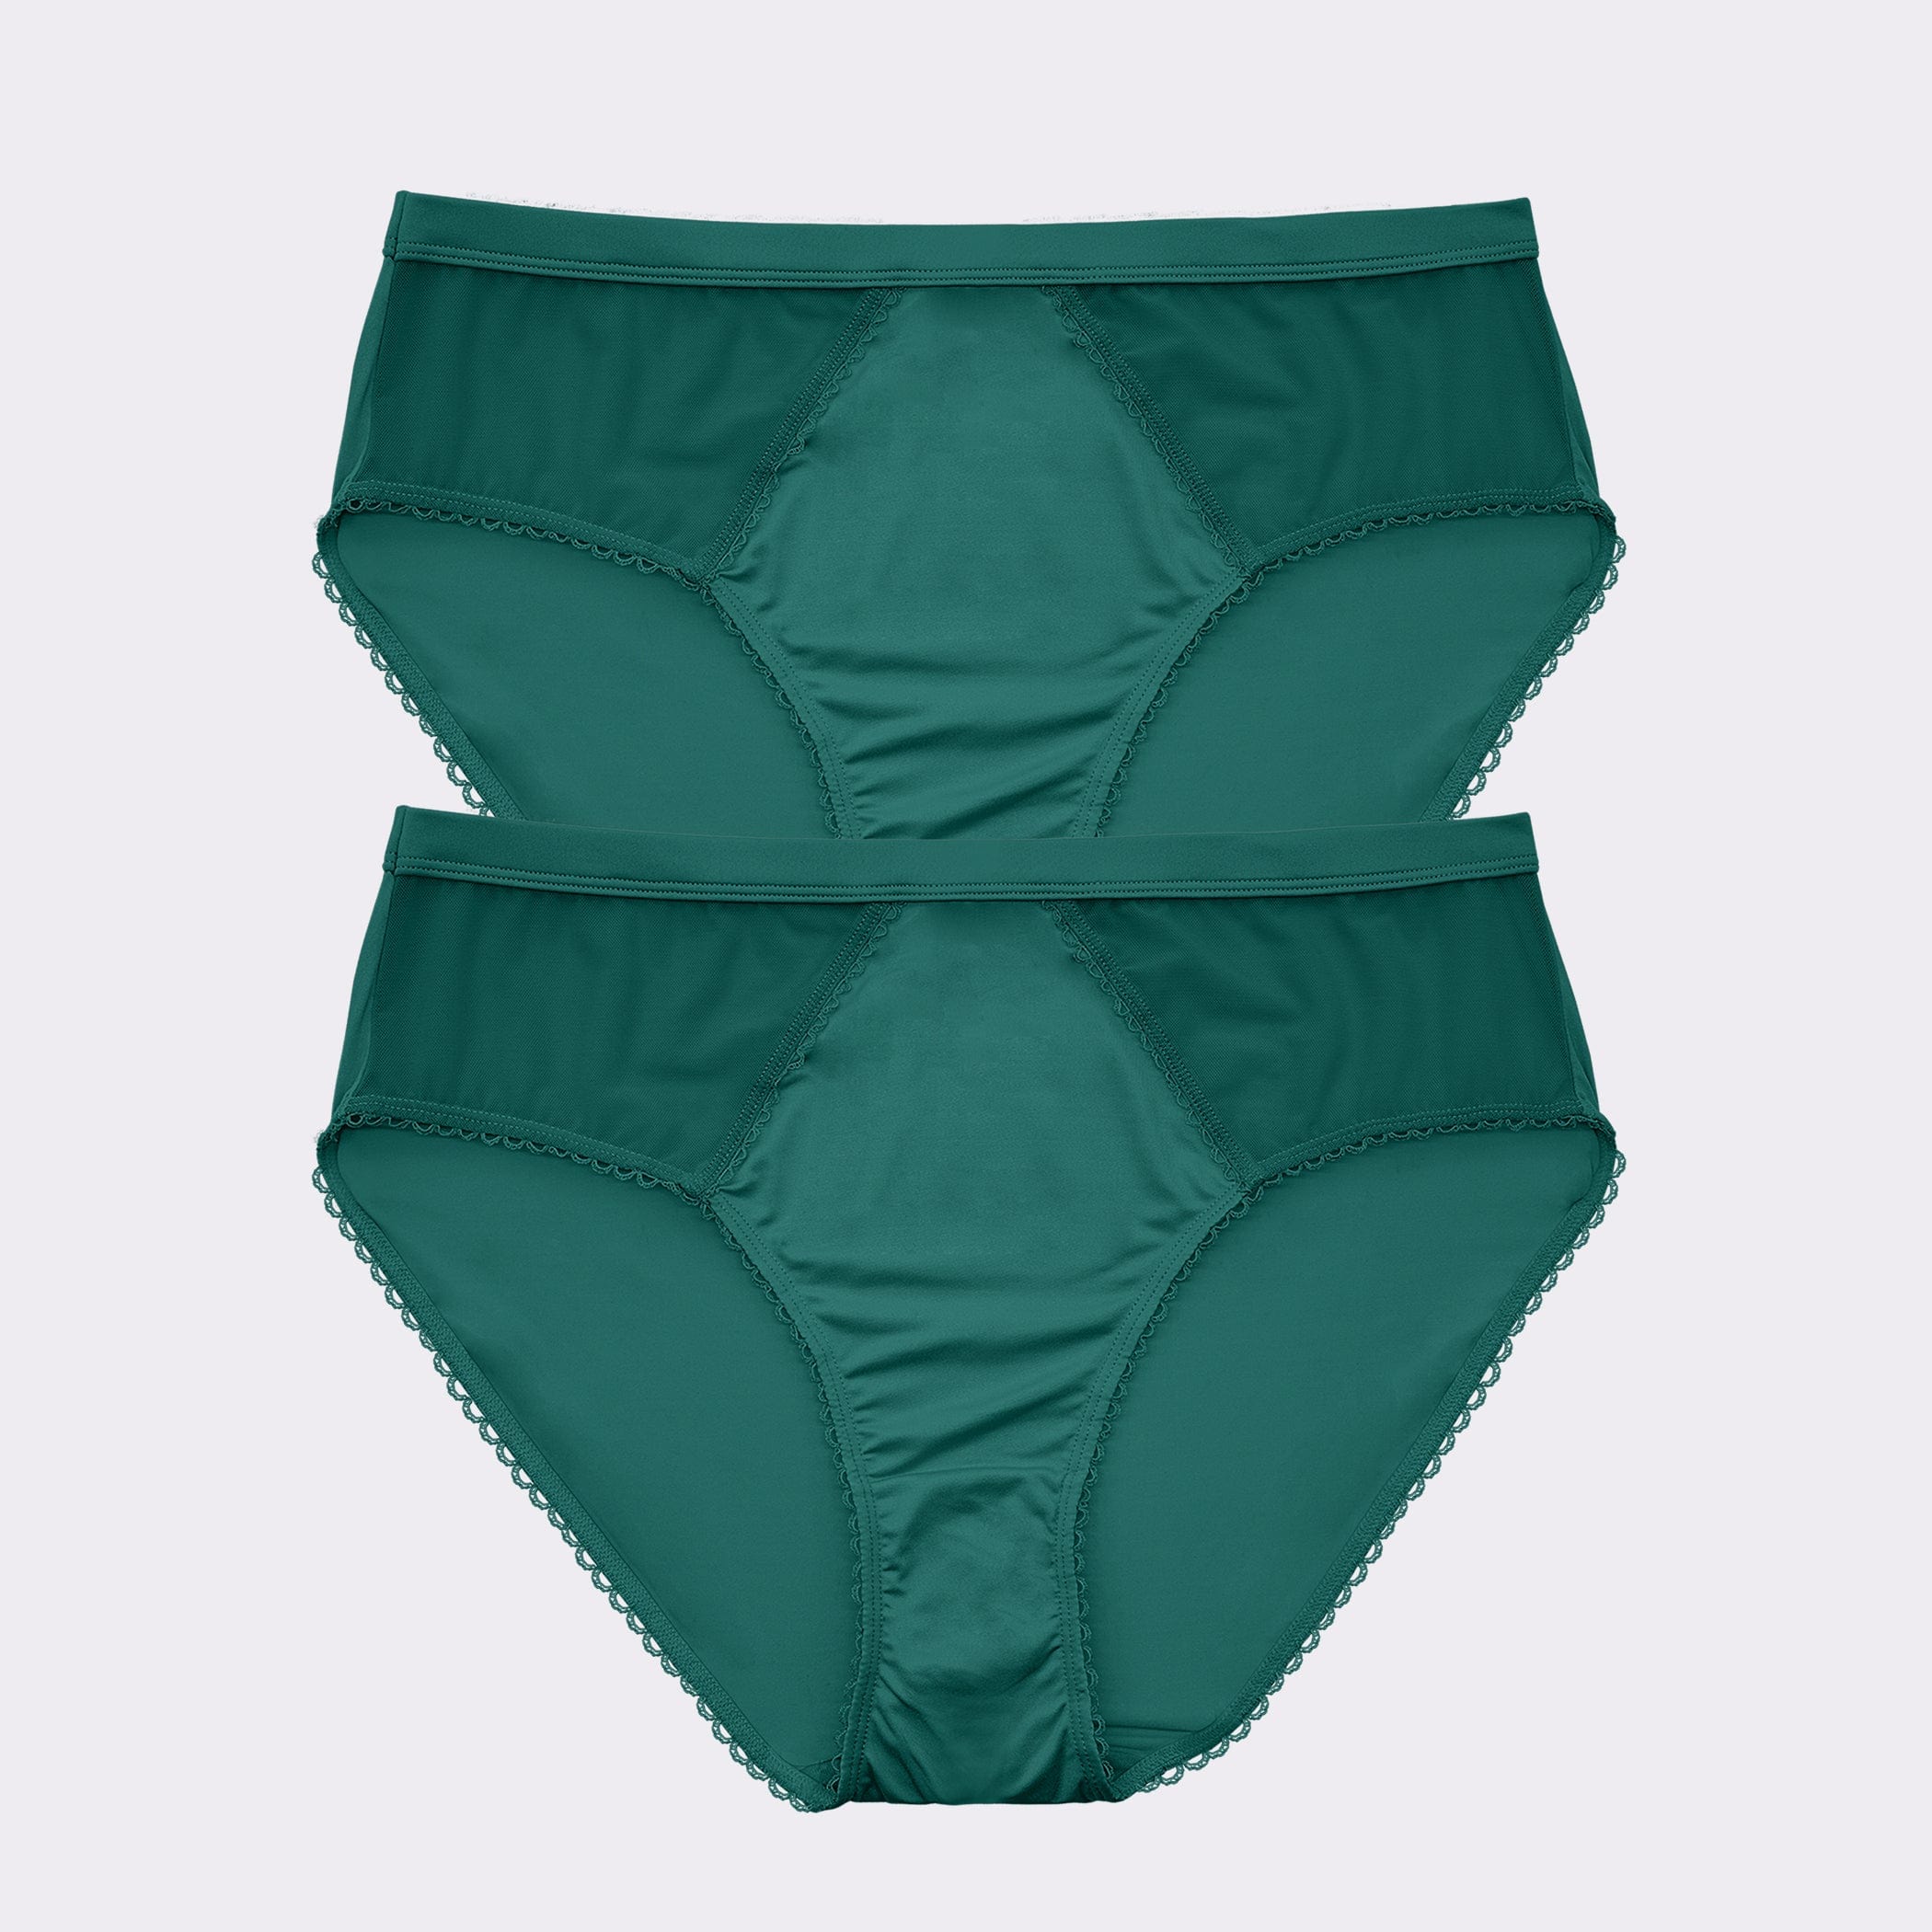 What's The Difference Between High-Waist and High-Cut Panties? -  ParfaitLingerie.com - Blog